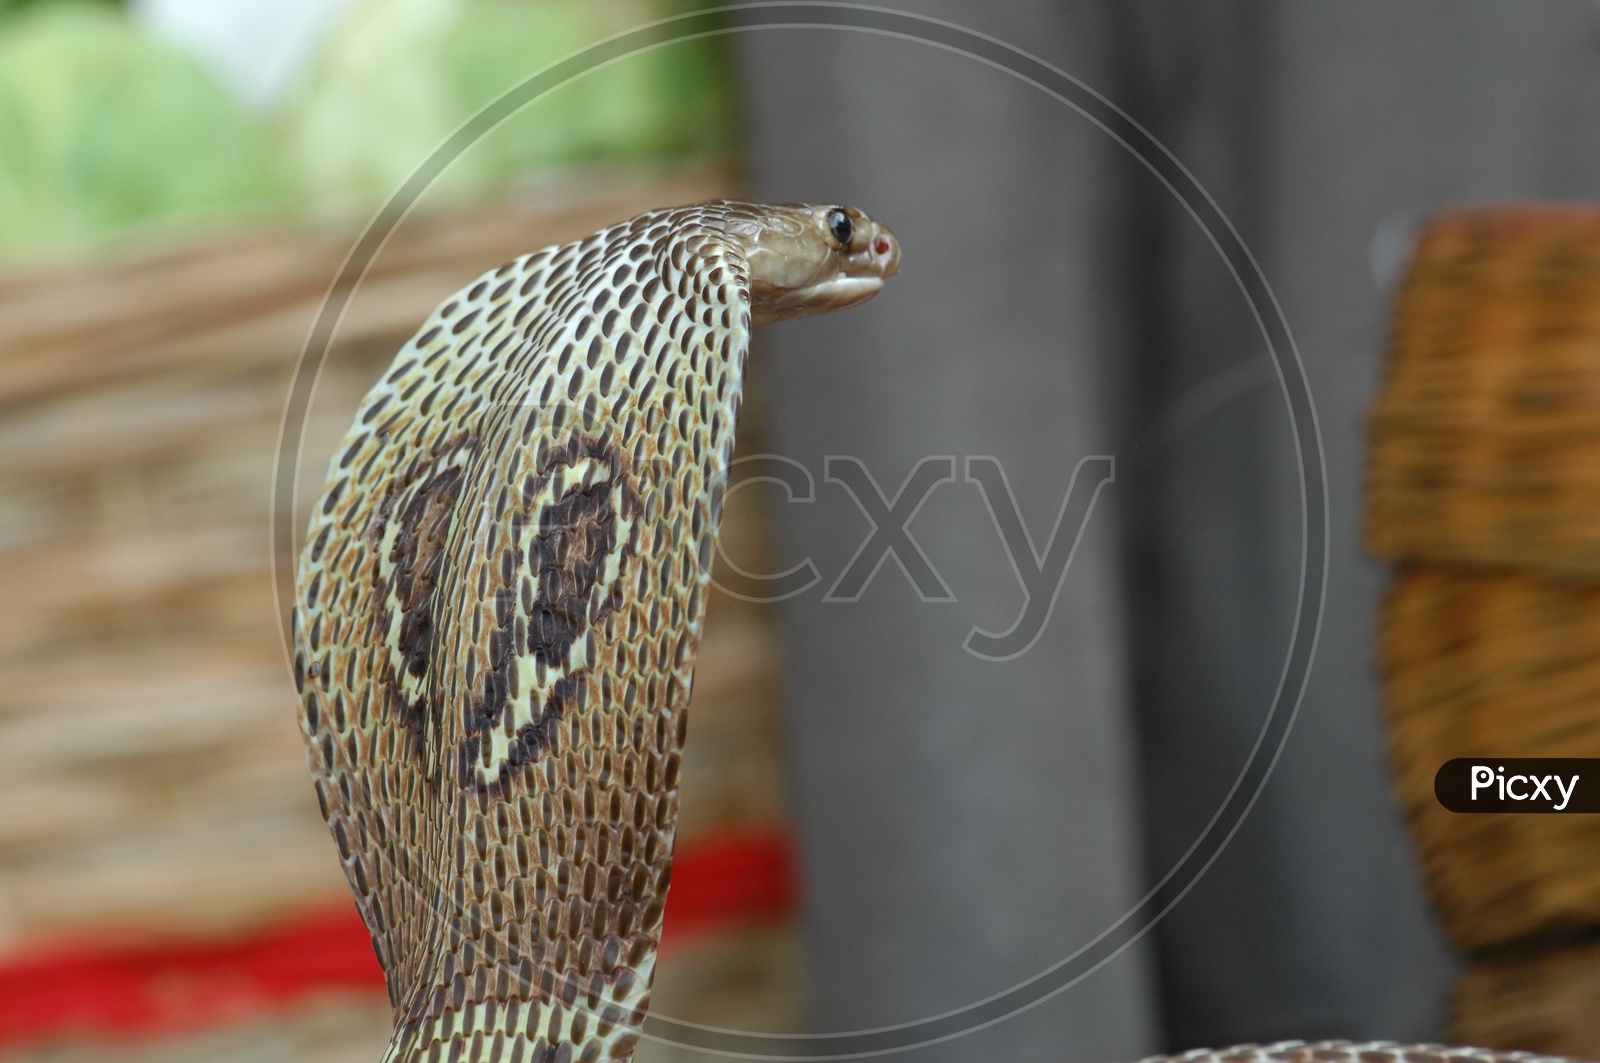 An Indian Cobra with its hood opened